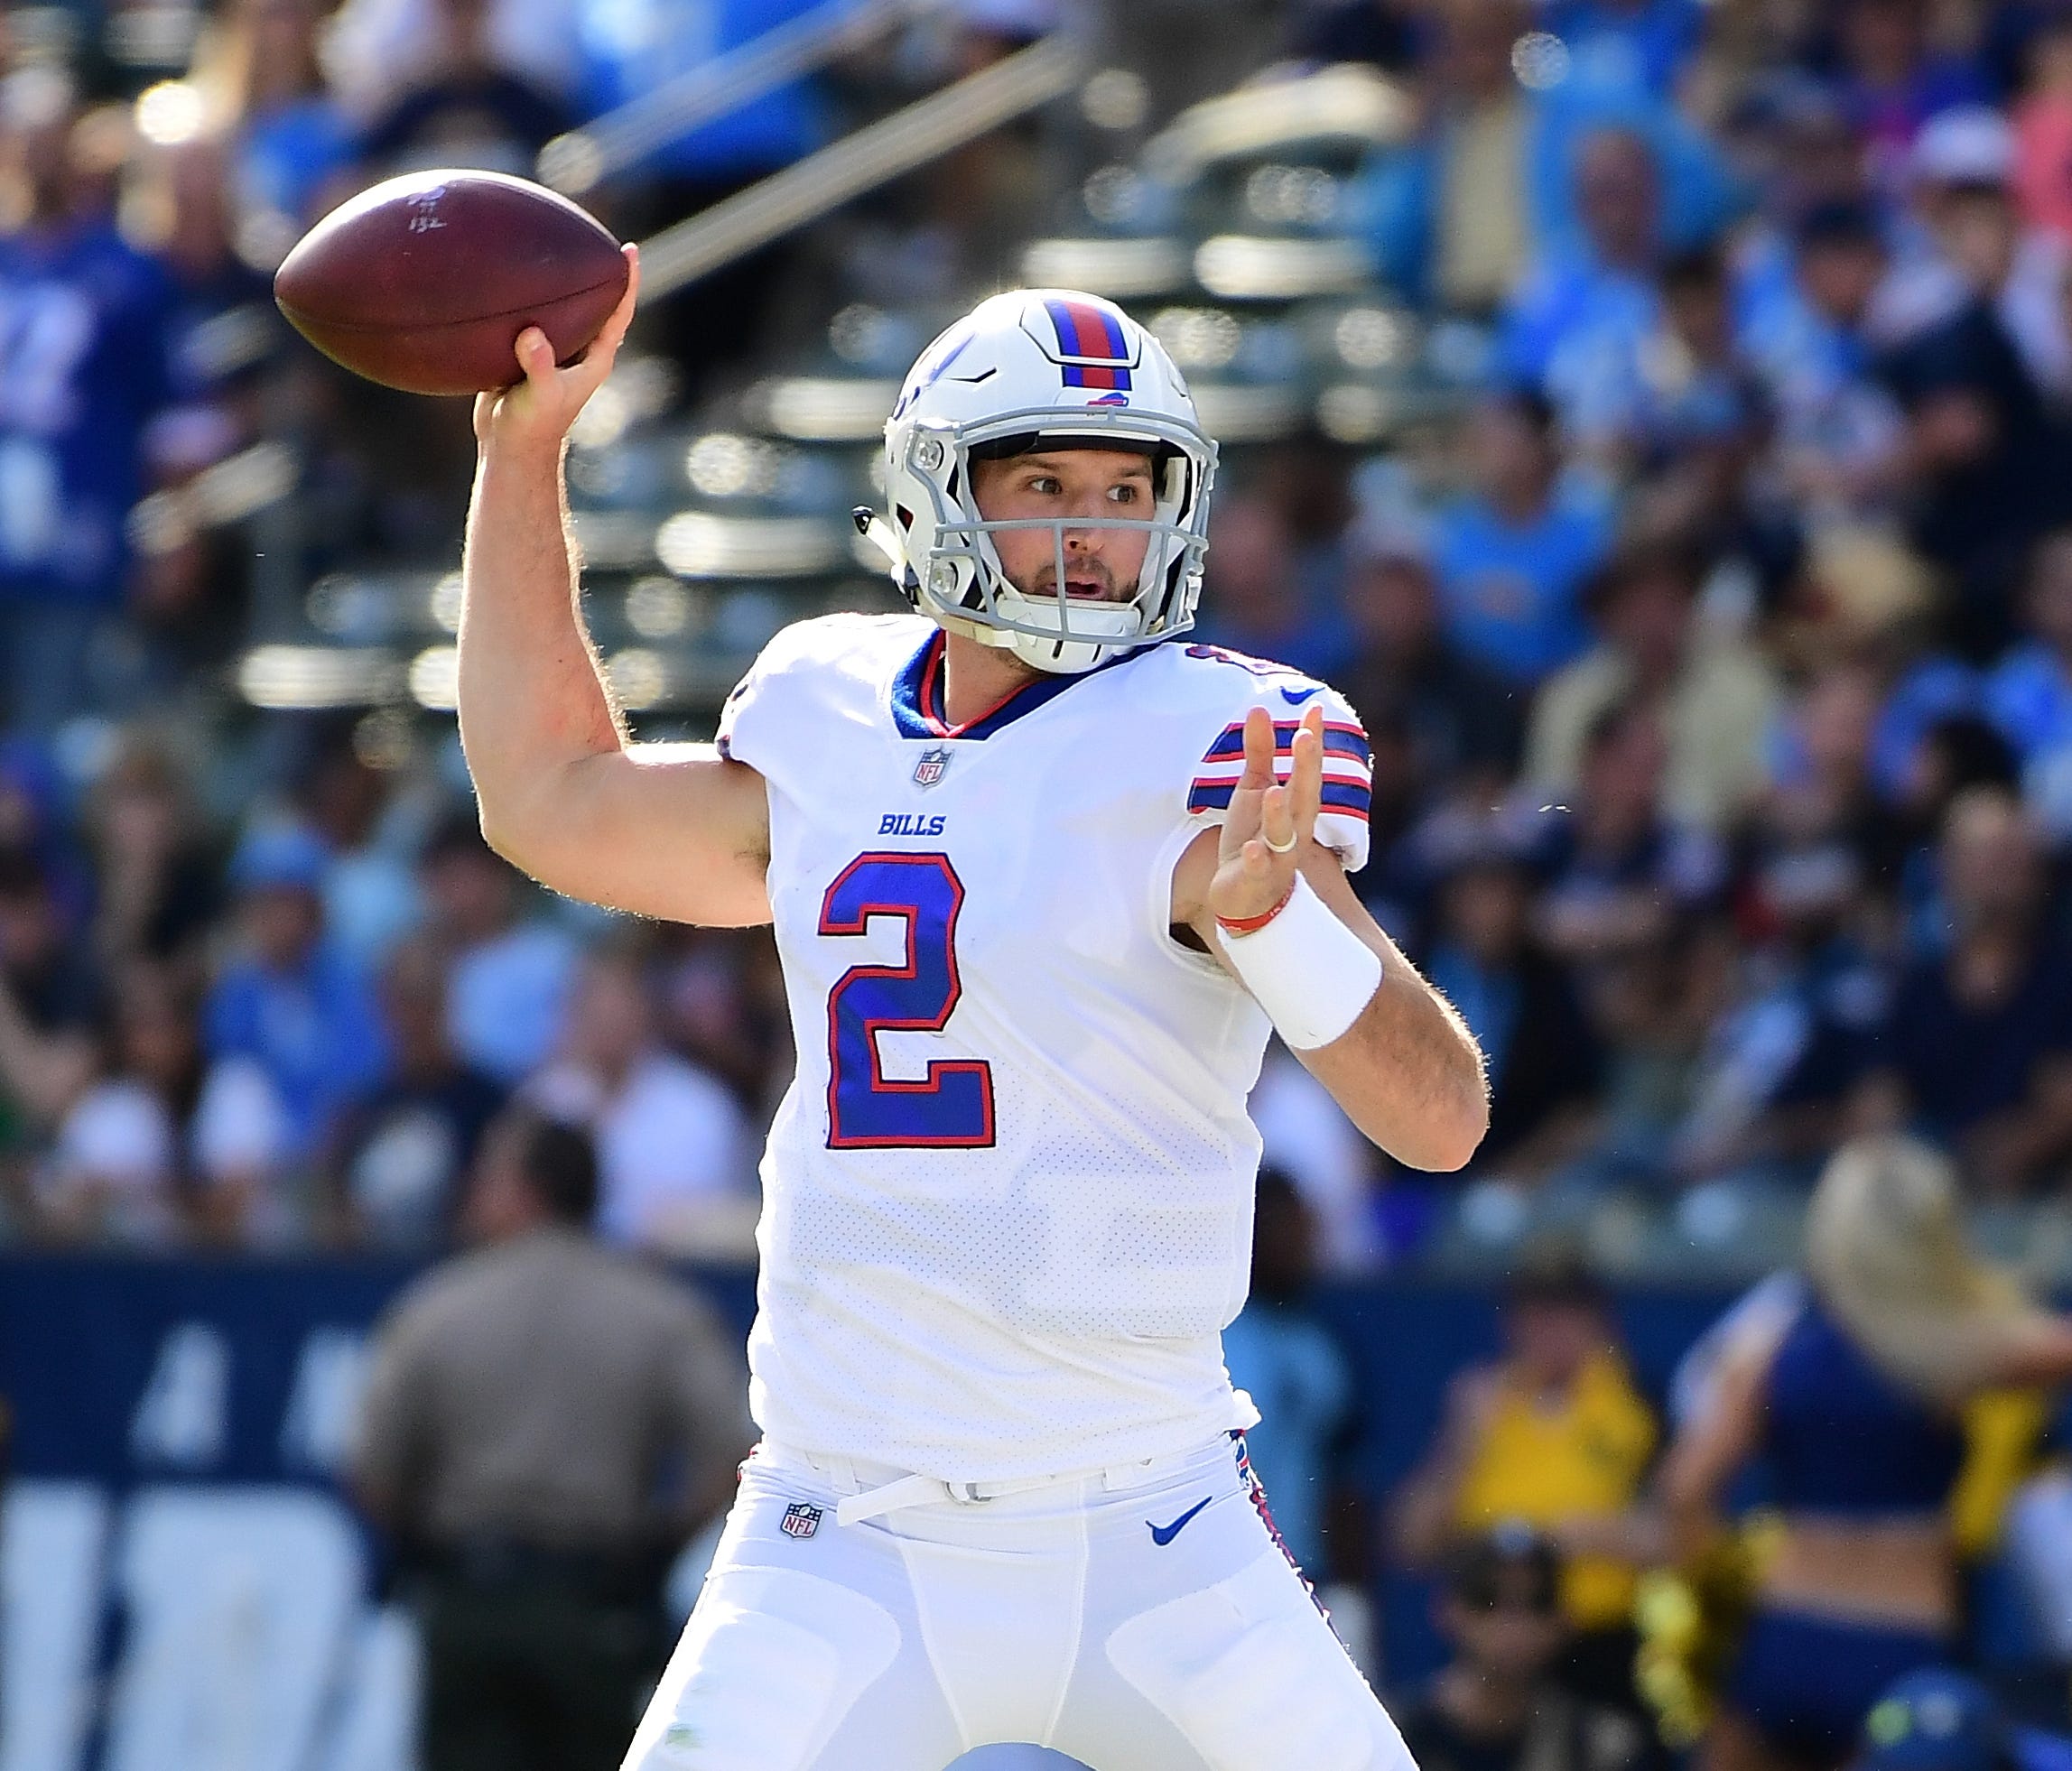 Nathan Peterman of the Buffalo Bills throws a pass during the first quarter of the game against the Los Angeles Chargers at the StubHub Center on November 19, 2017 in Carson, California.